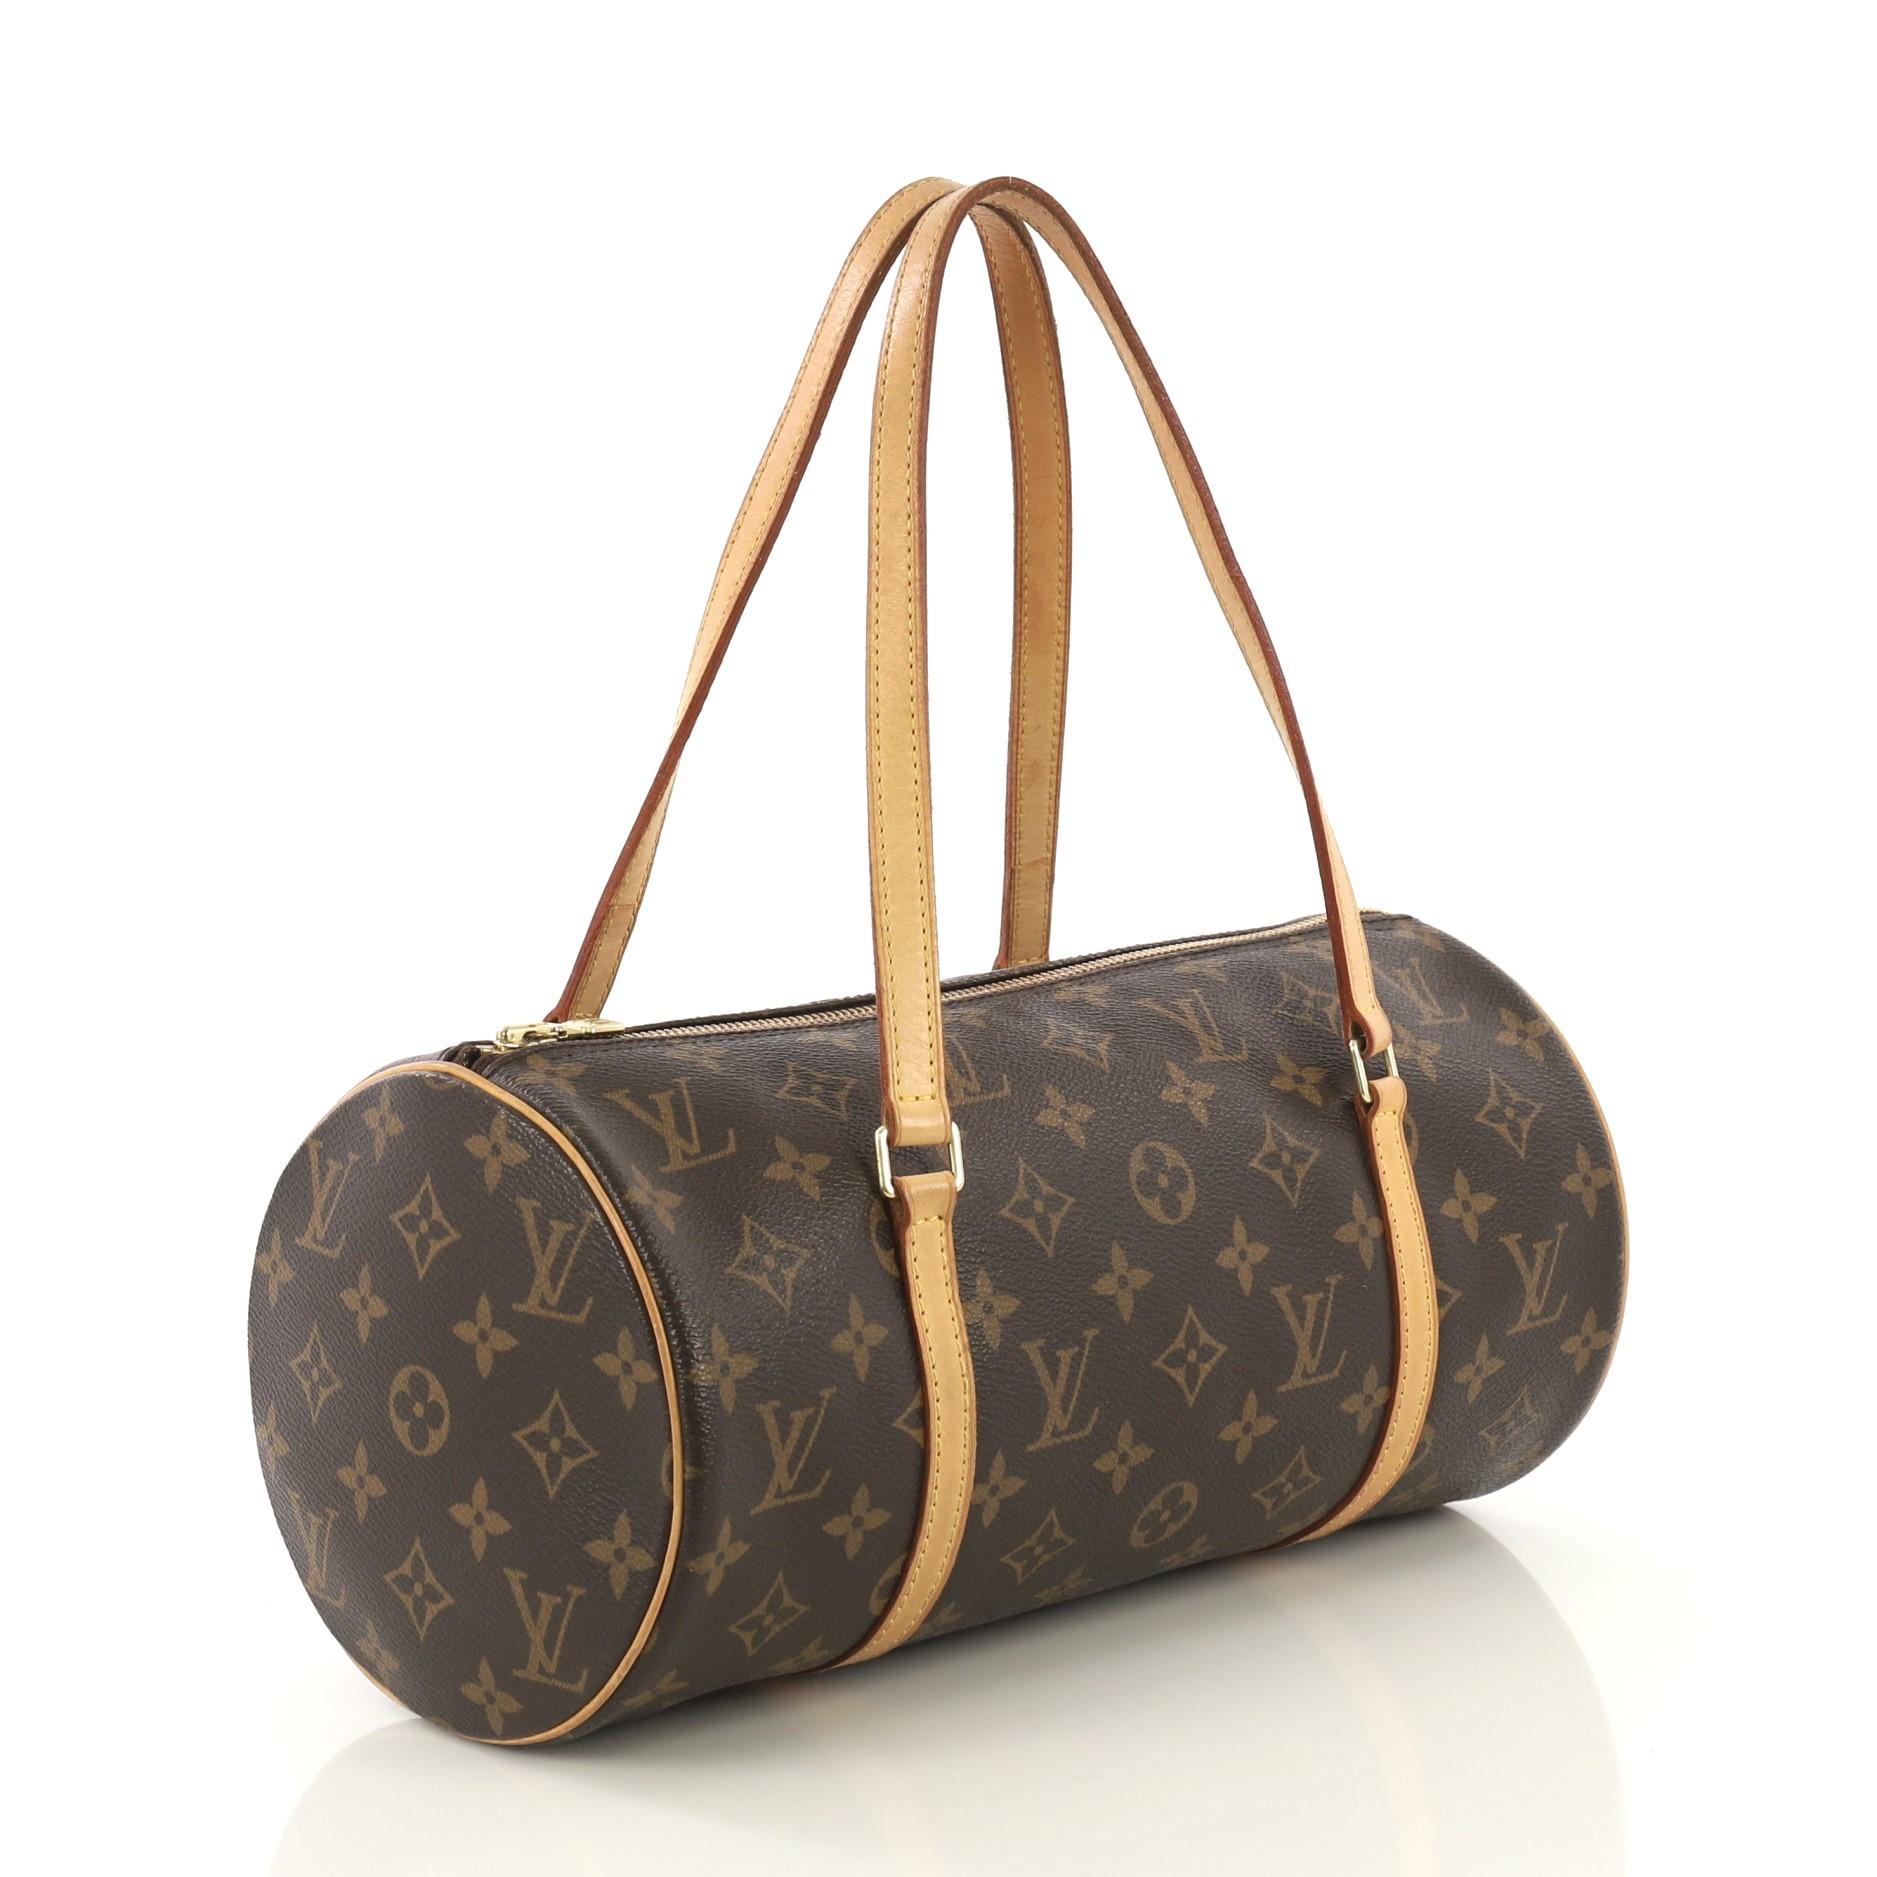 This Louis Vuitton Papillon Handbag Monogram Canvas 30, crafted with brown monogram coated canvas, features dual leather handles, leather trim, and gold-tone hardware. Its zip closure opens to a brown leather interior. Authenticity code reads: